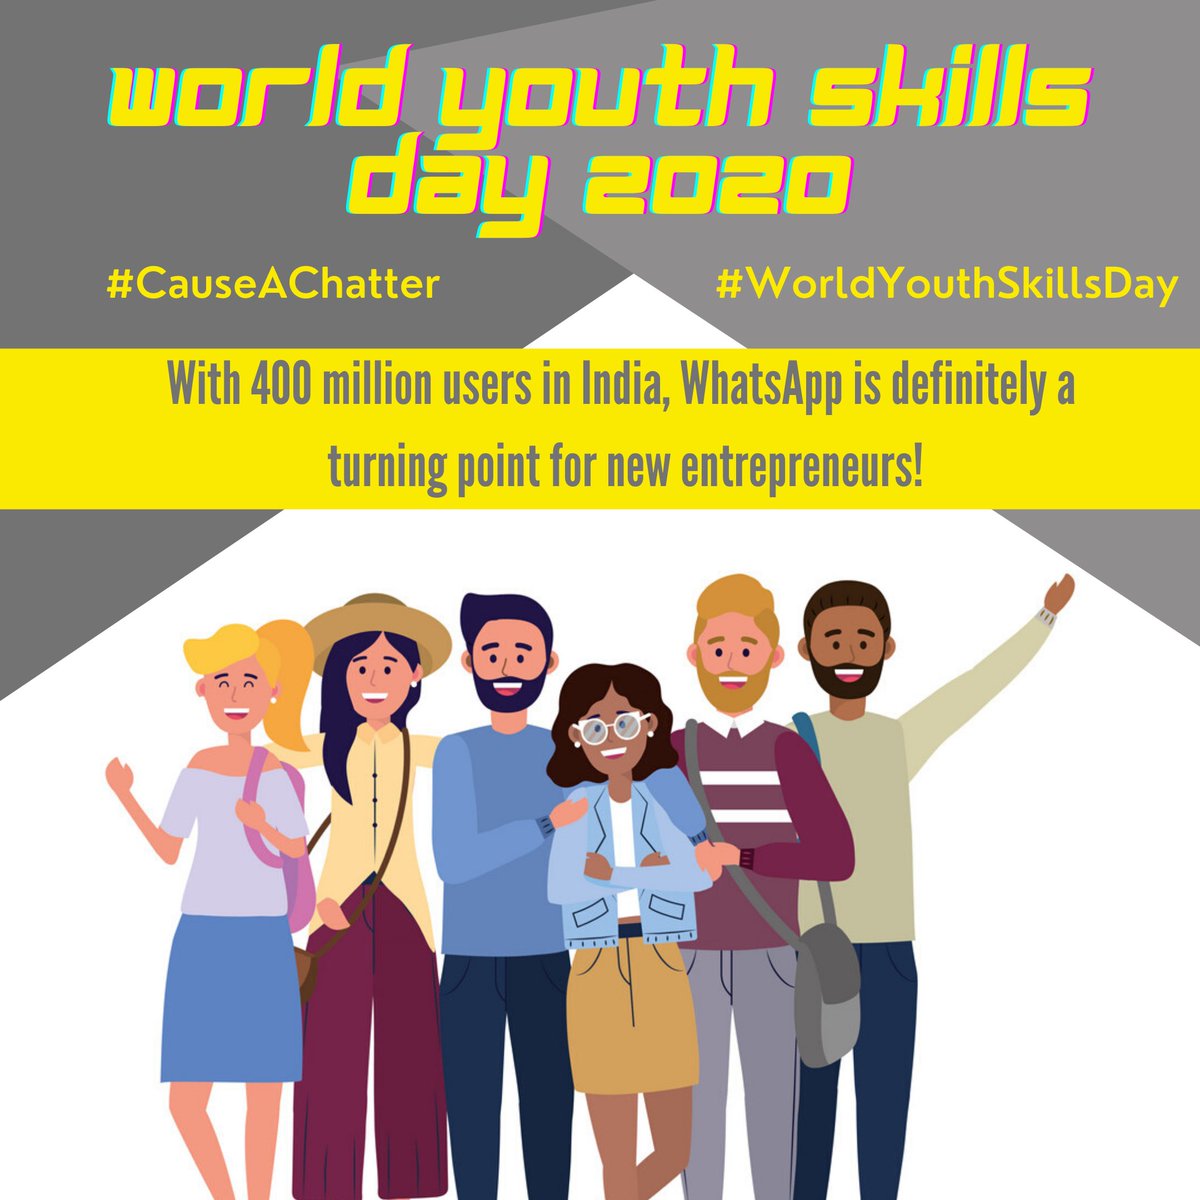 Smartphones have replaced so many jobs around the world. WhatsApp and Google play an especially important role in encourgaing new entepreneurs and creators to sell and promote their products and content.  https://yourstory.com/2020/02/indian-startups-smb-whatsapp  #WorldYouthSkillsDay  #CauseAChatter